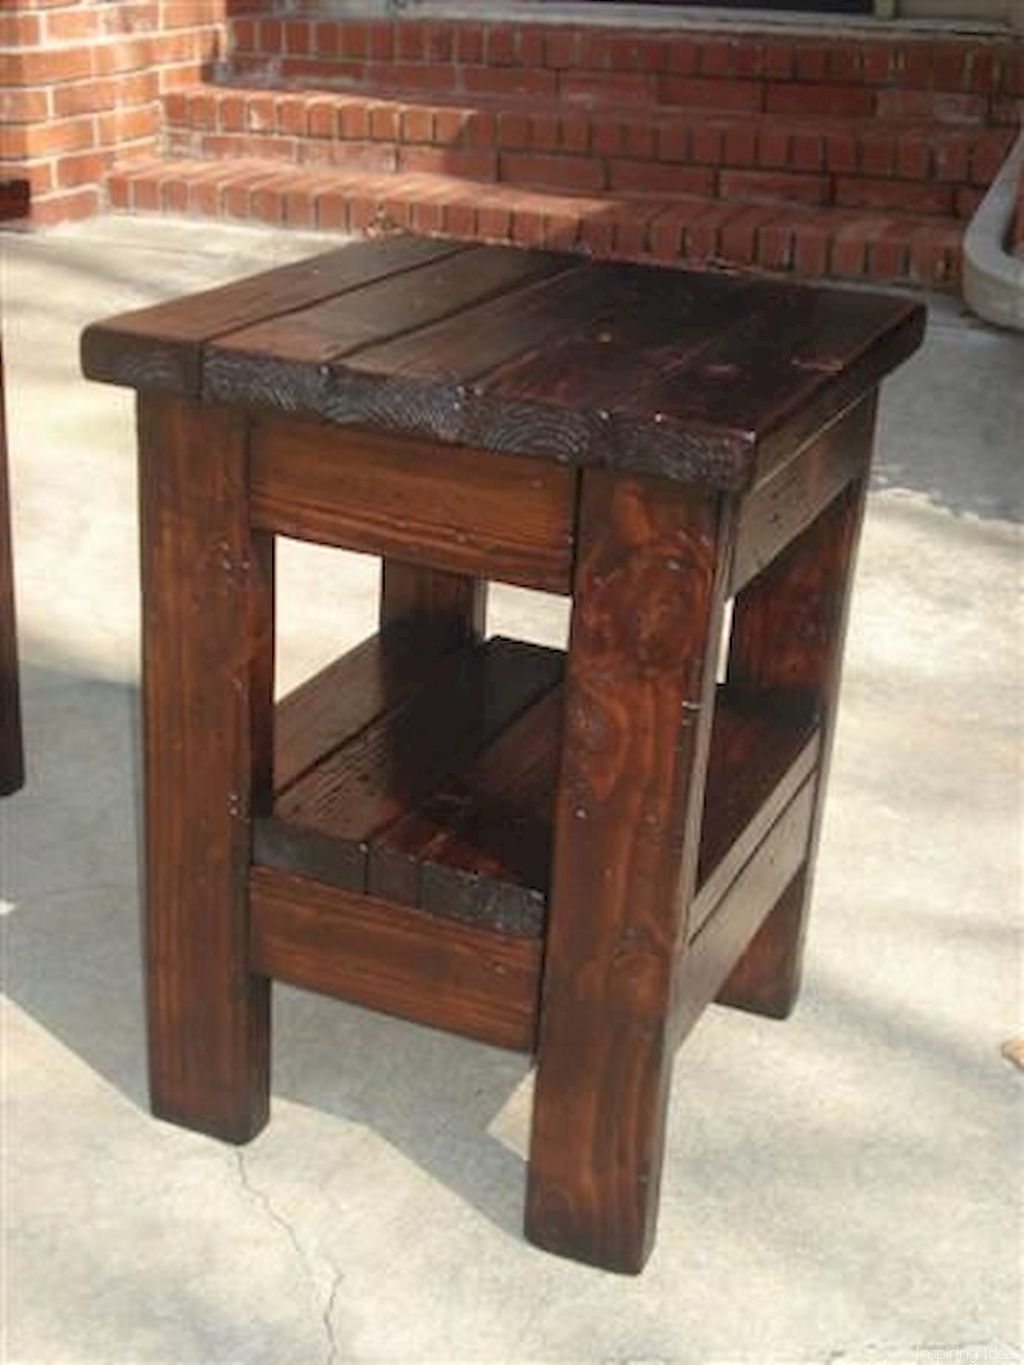 Red distressed table